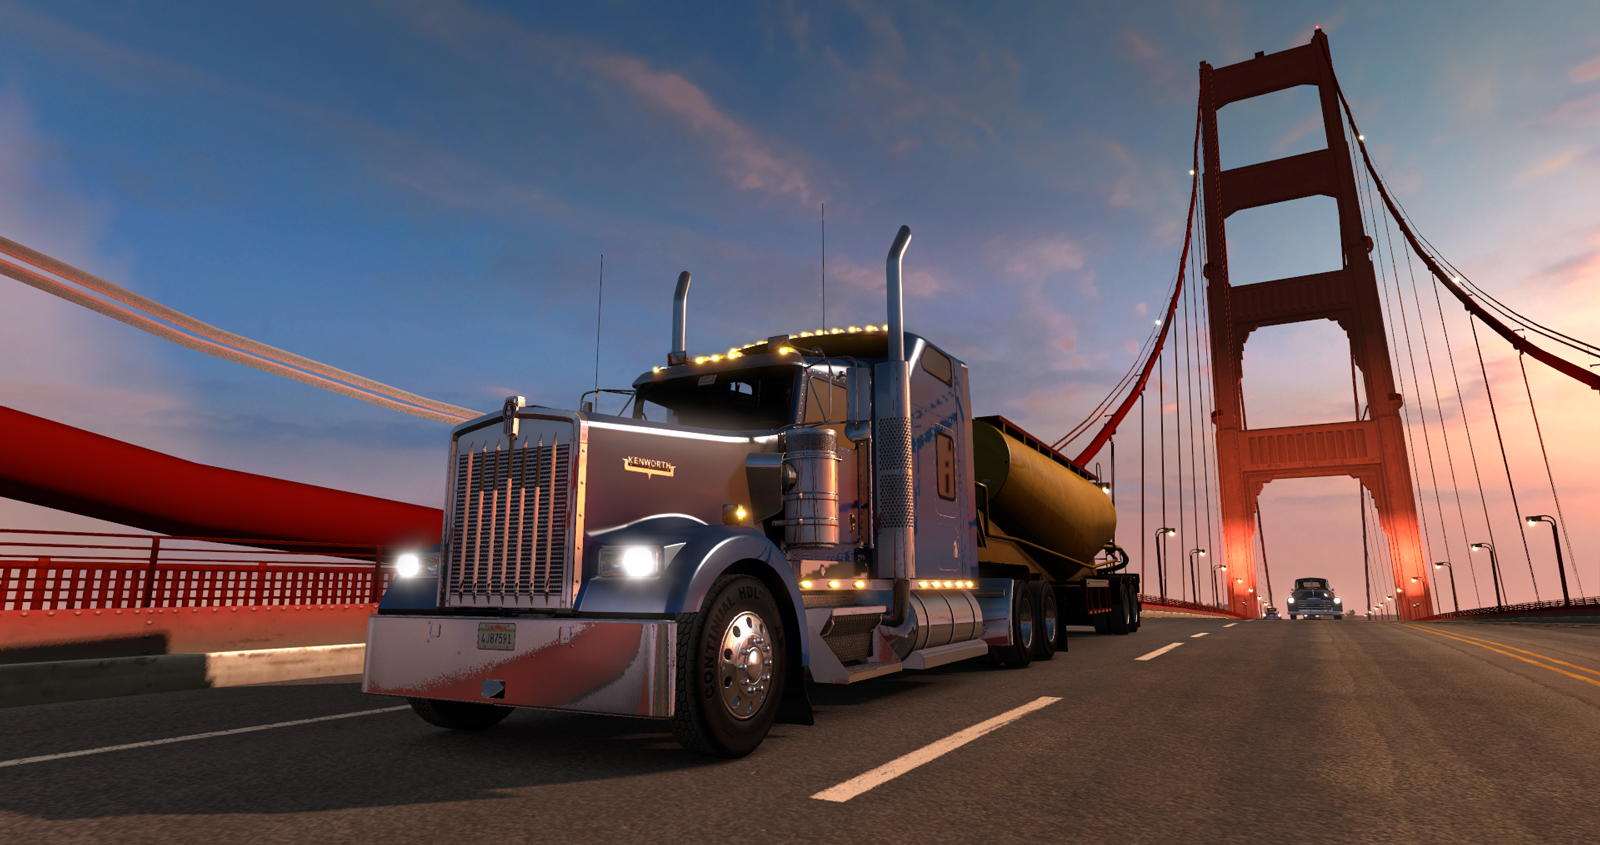 vforum.vn-329855-awesome-new-images-and-interiors-from-american-truck-simulator-9.jpg